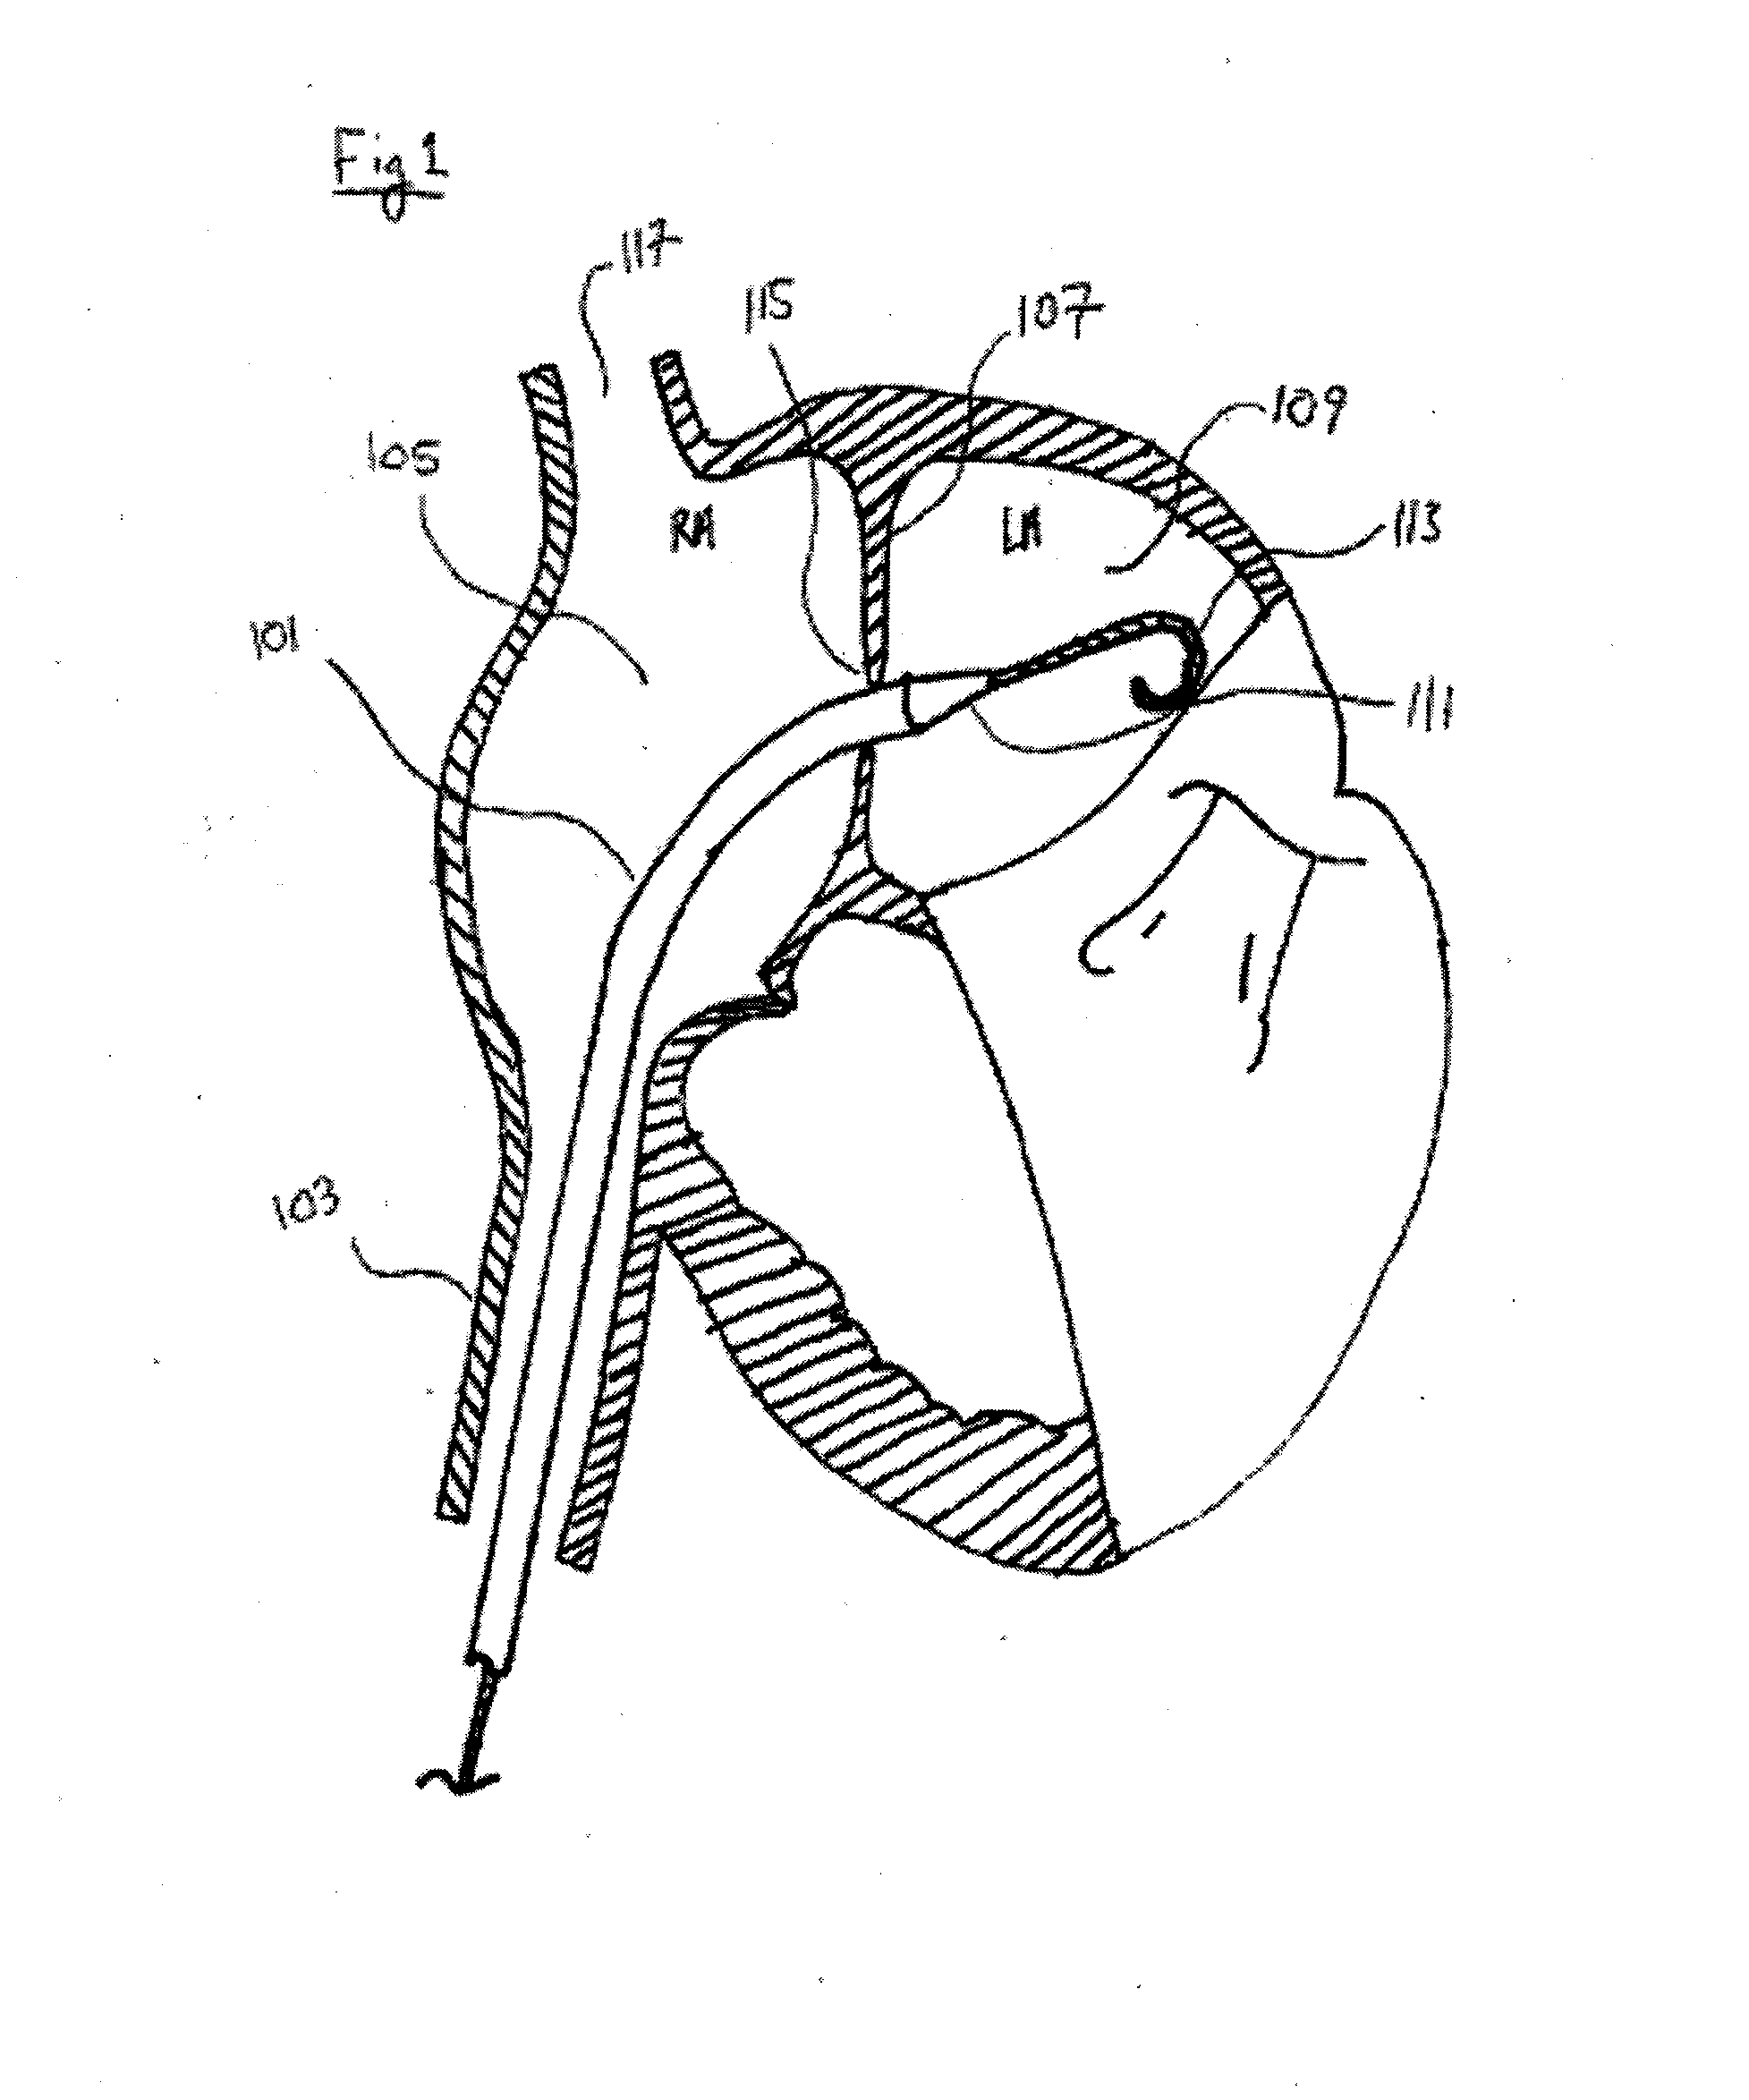 Methods and devices for intra-atrial shunts having adjustable sizes